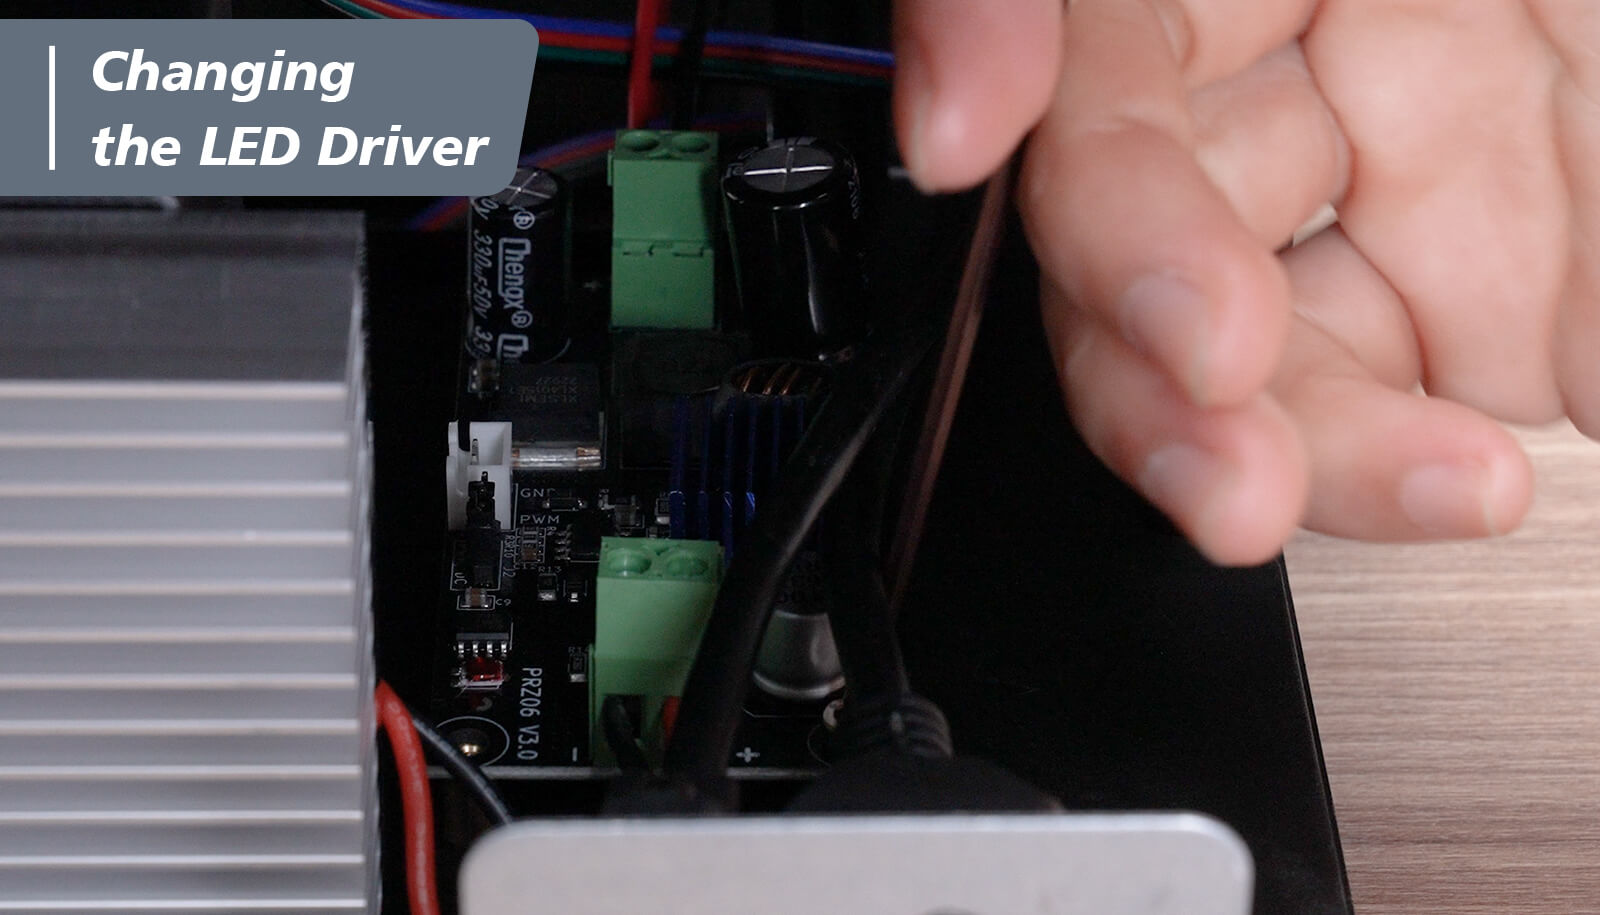 Secure the LED driver back to the Phrozen printer